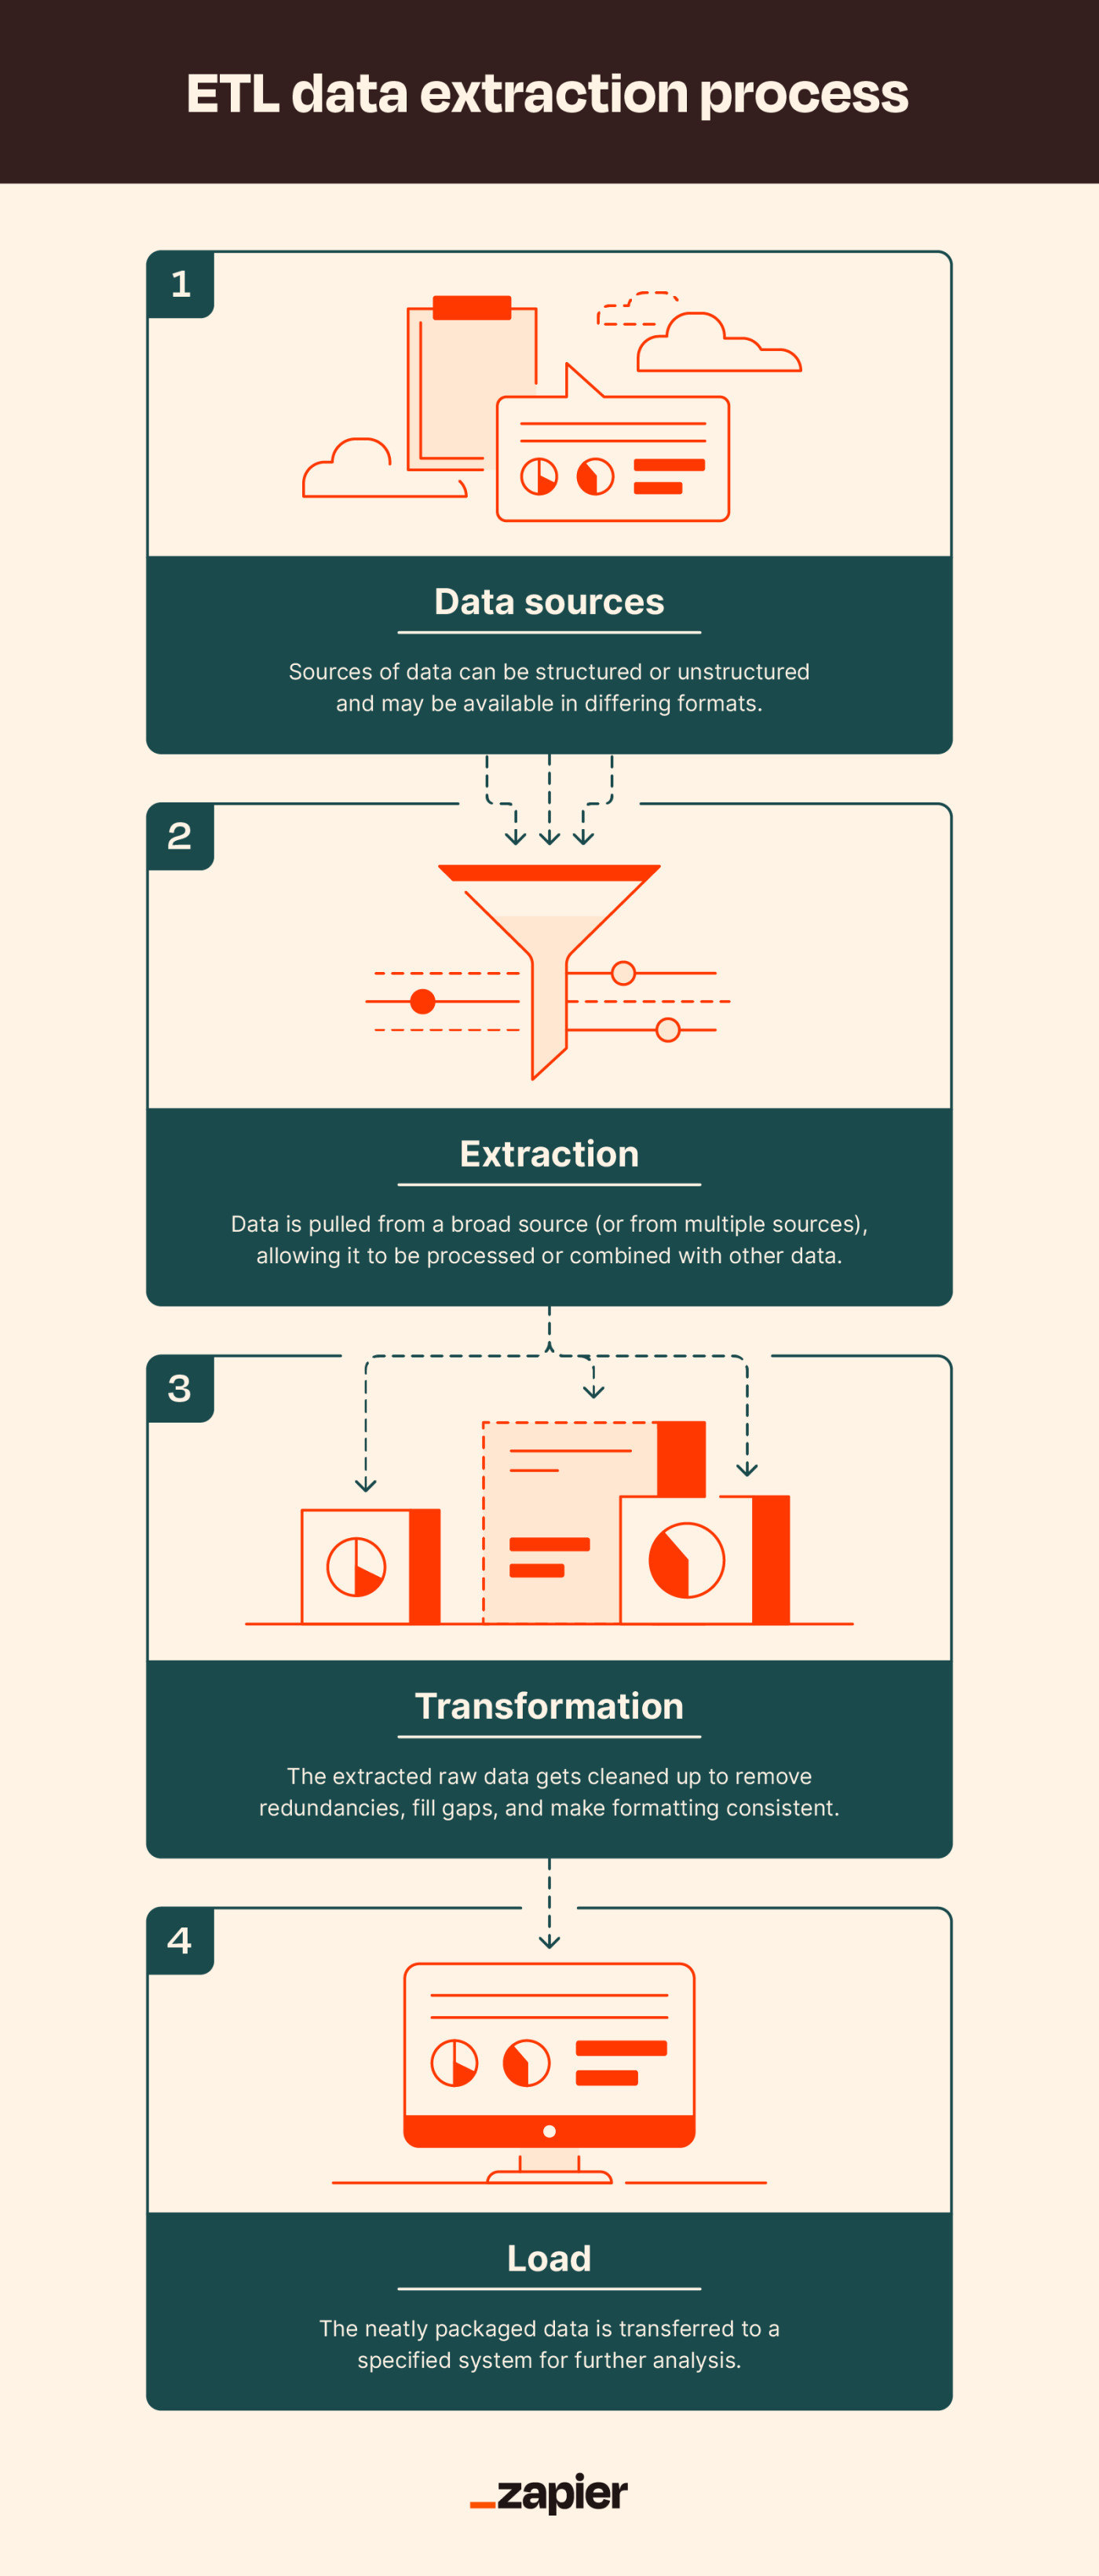 Illustration showing the data extraction process